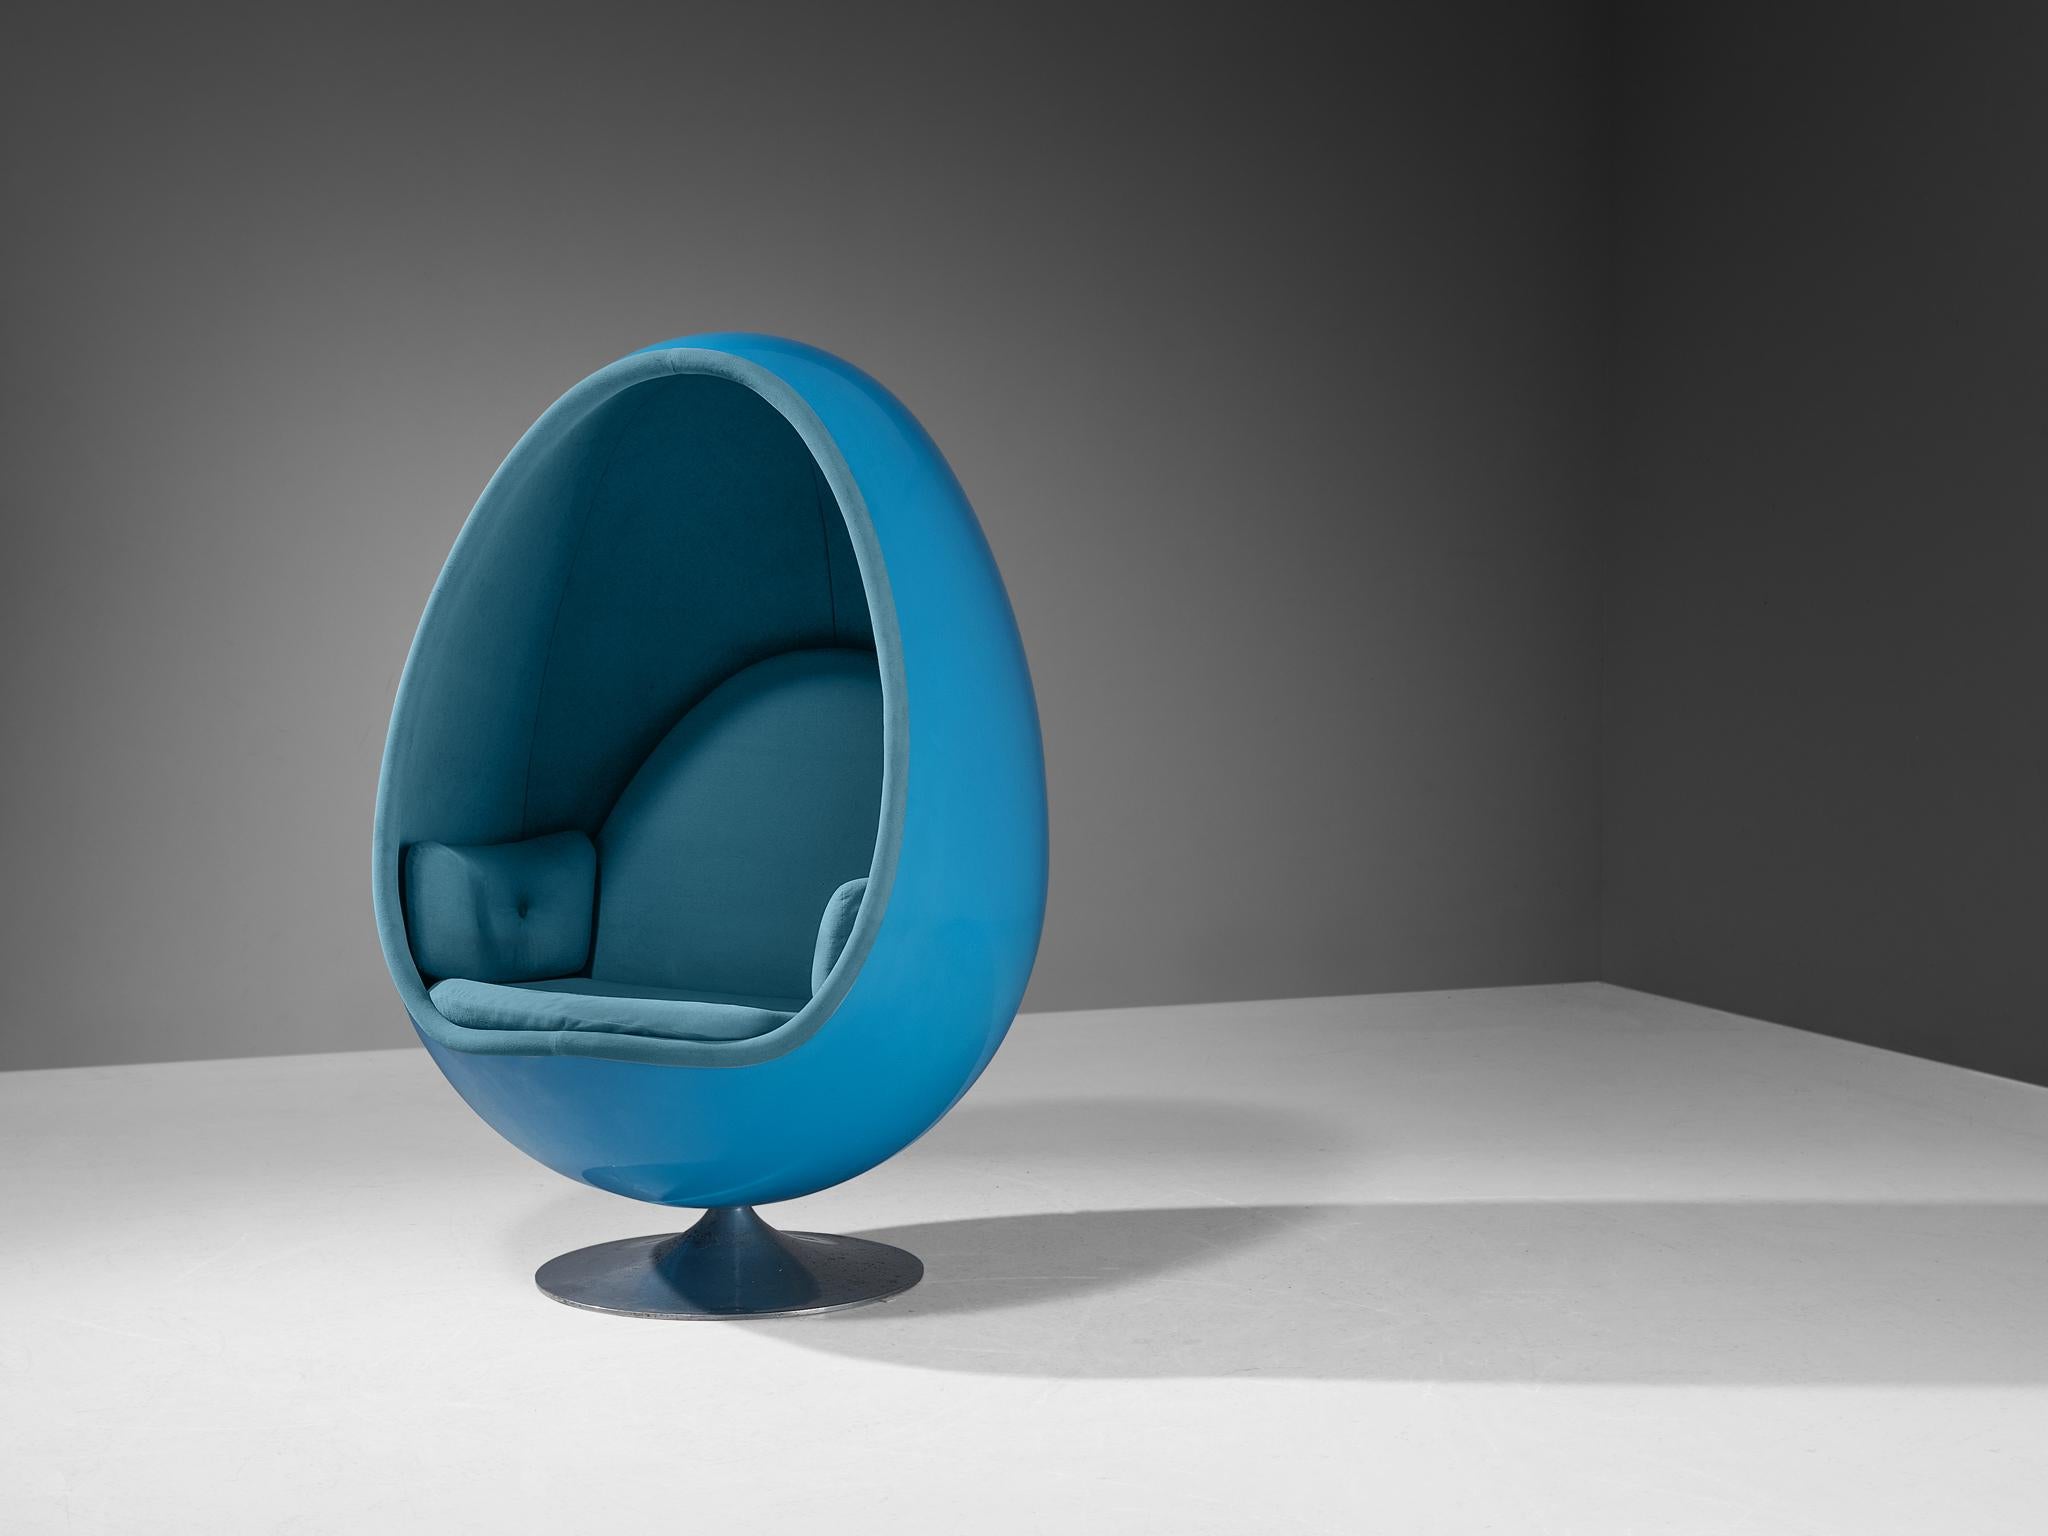 Henrik Thor-Larsen for Torlan Staffanstorp, 'Ovalia' Egg Chair, fiberglass, aluminum, fabric, Sweden, 1968-1978

In 1968, this postmodern 'Ovalia' Egg Chair was first presented at the Scandinavian Furniture Fair in Stockholm. The chair perceived